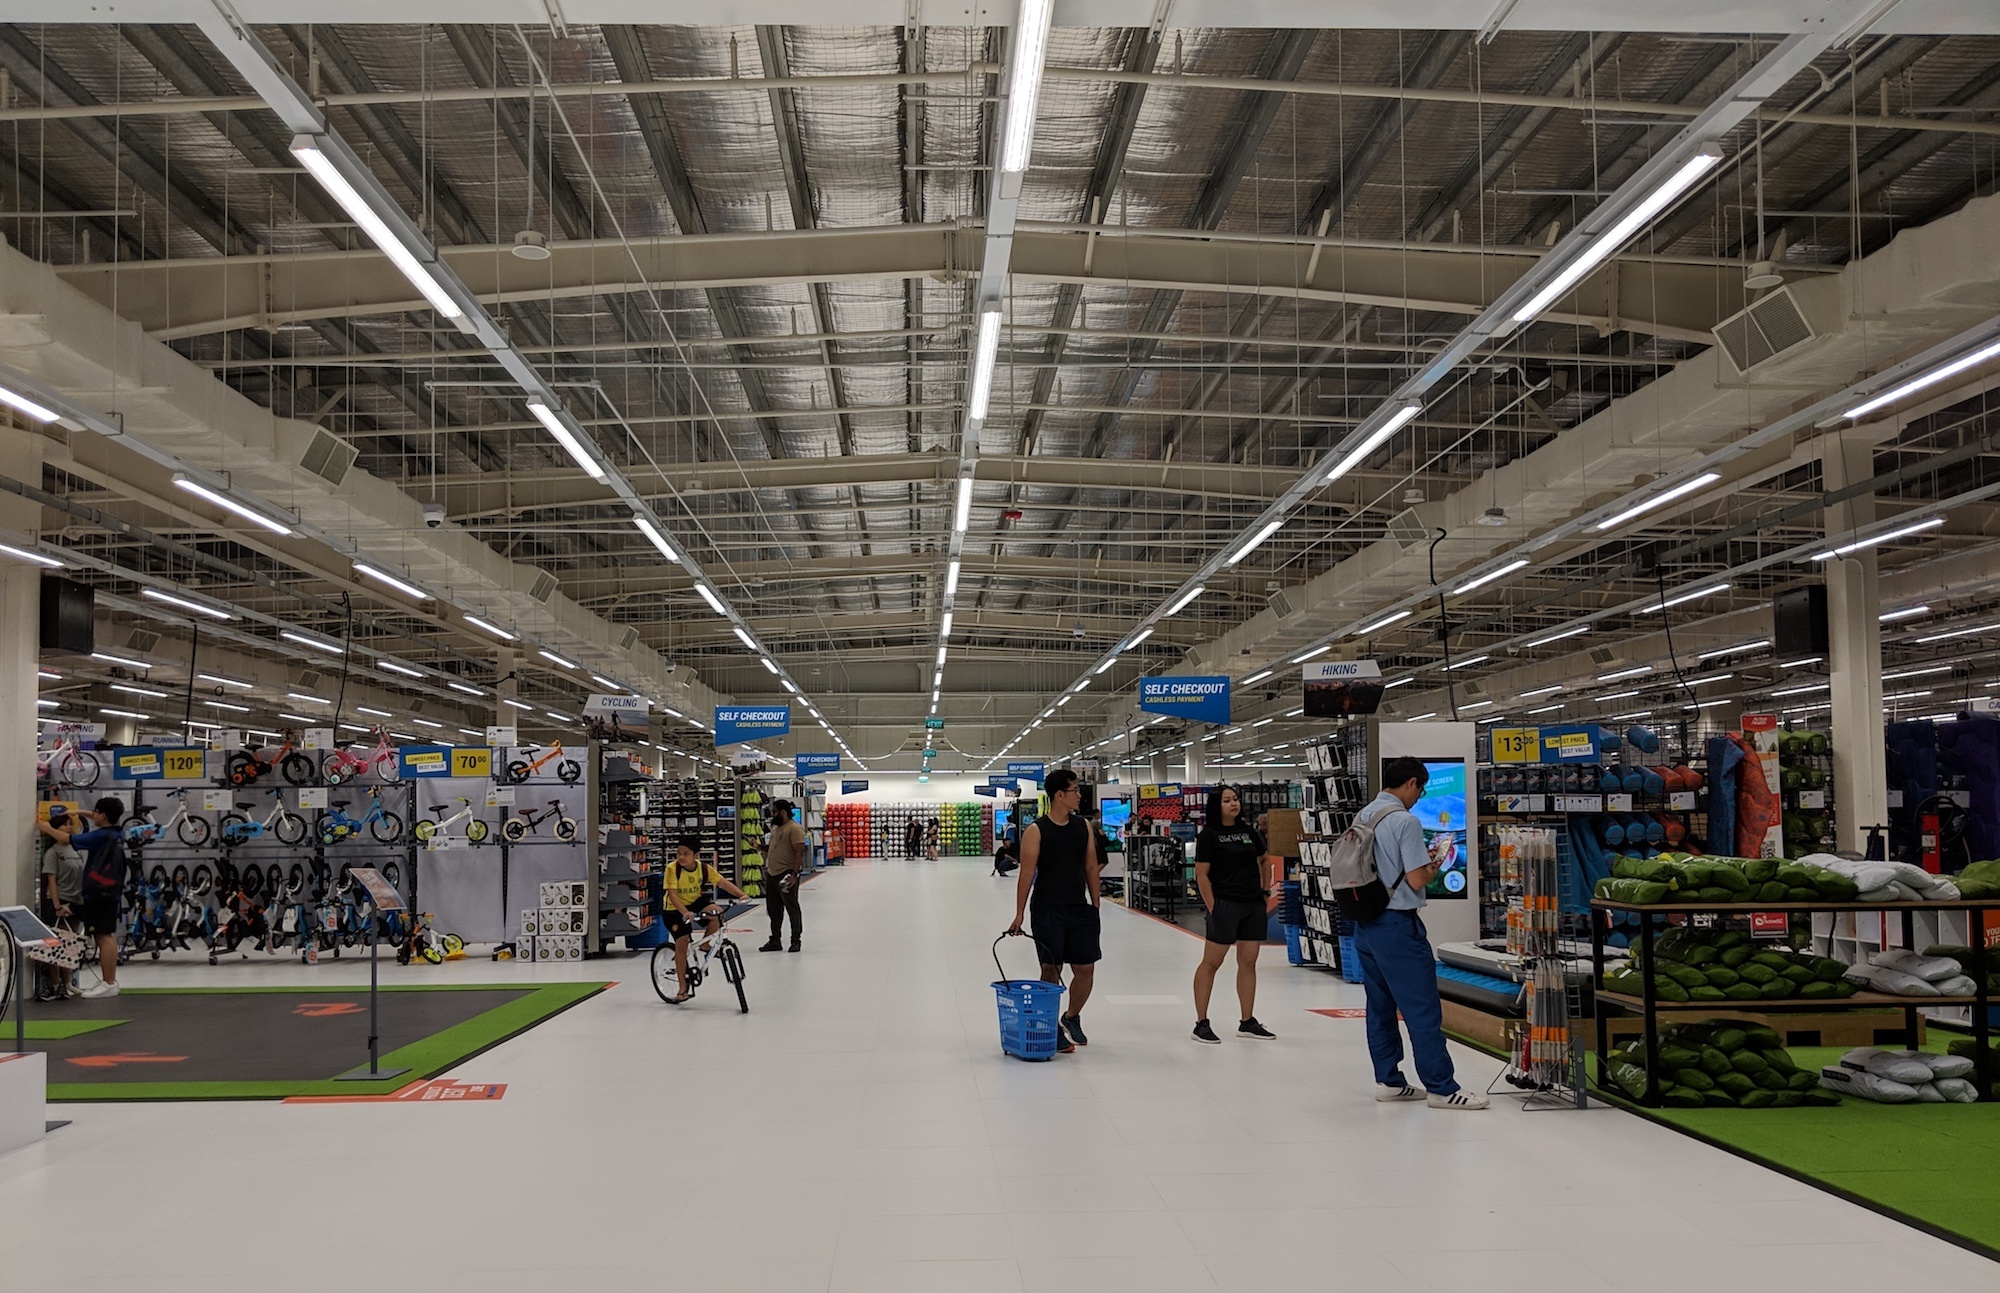 decathlon store opening times